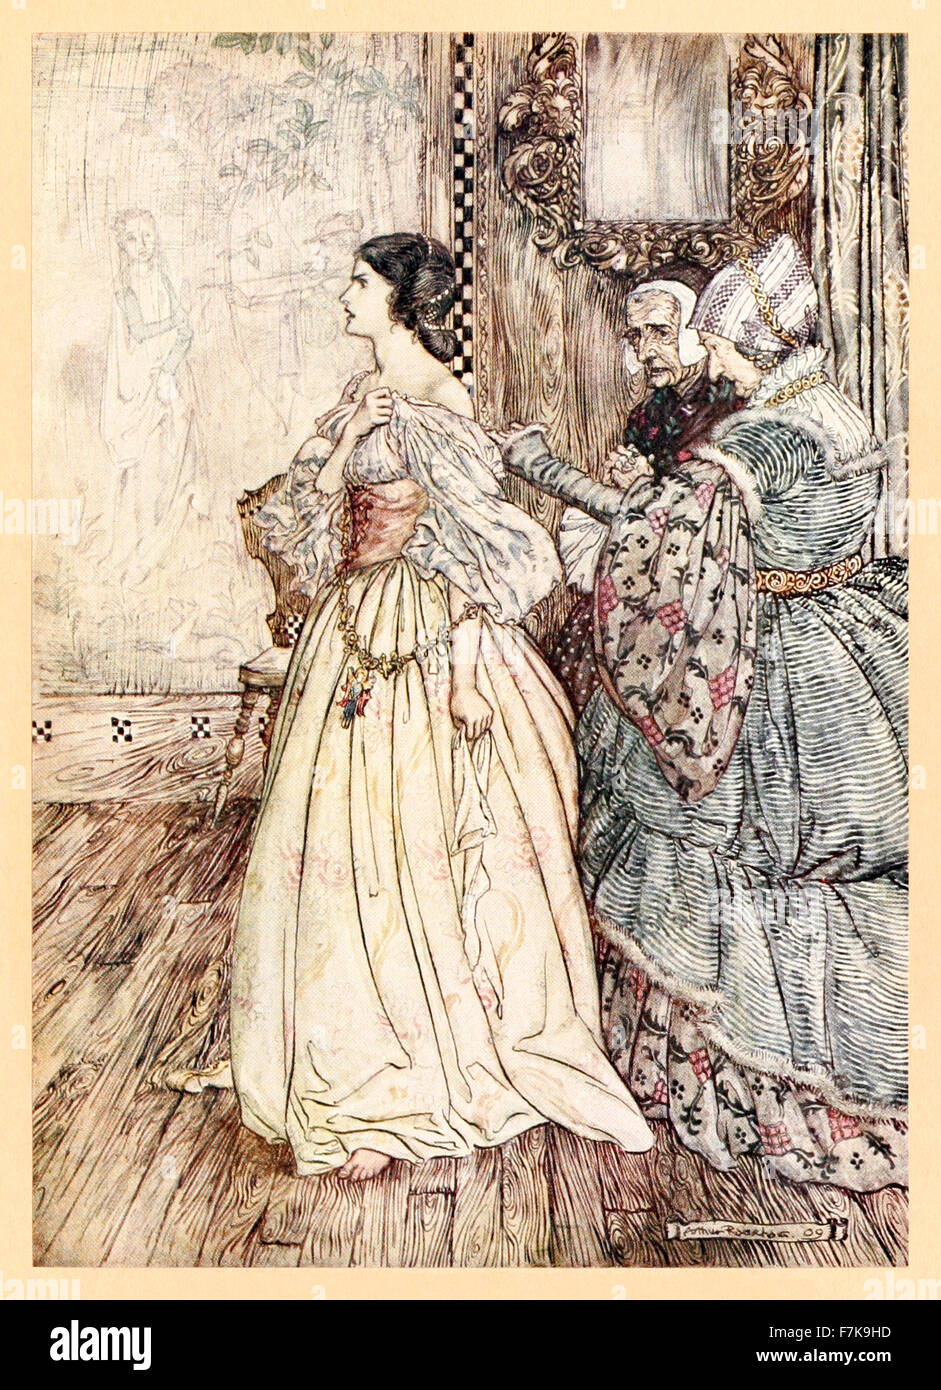 ''She hath a mark, like a violet, between her shoulders, and another like it on the instep of her left foot.'' from ‘Undine’ illustrated by Arthur Rackham (1867-1939). See description for more information. Stock Photo